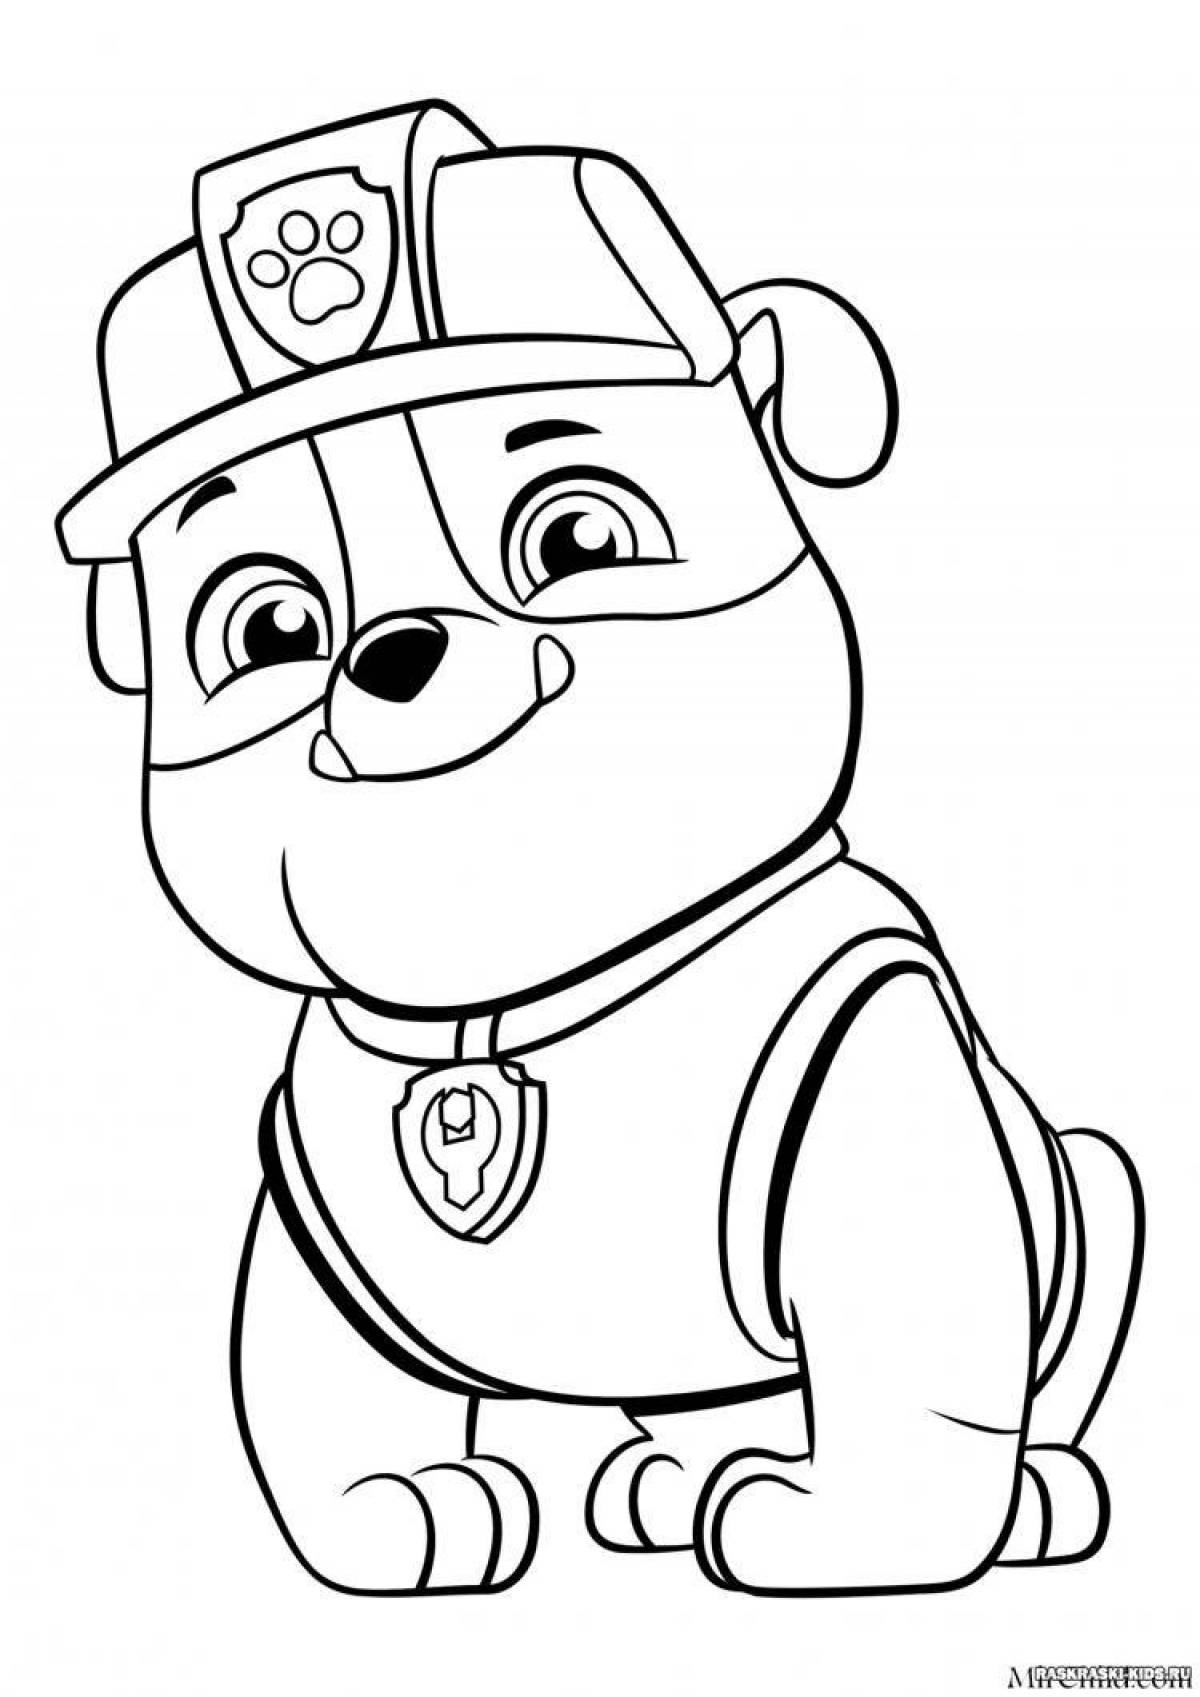 Witty Paw Patrol coloring book